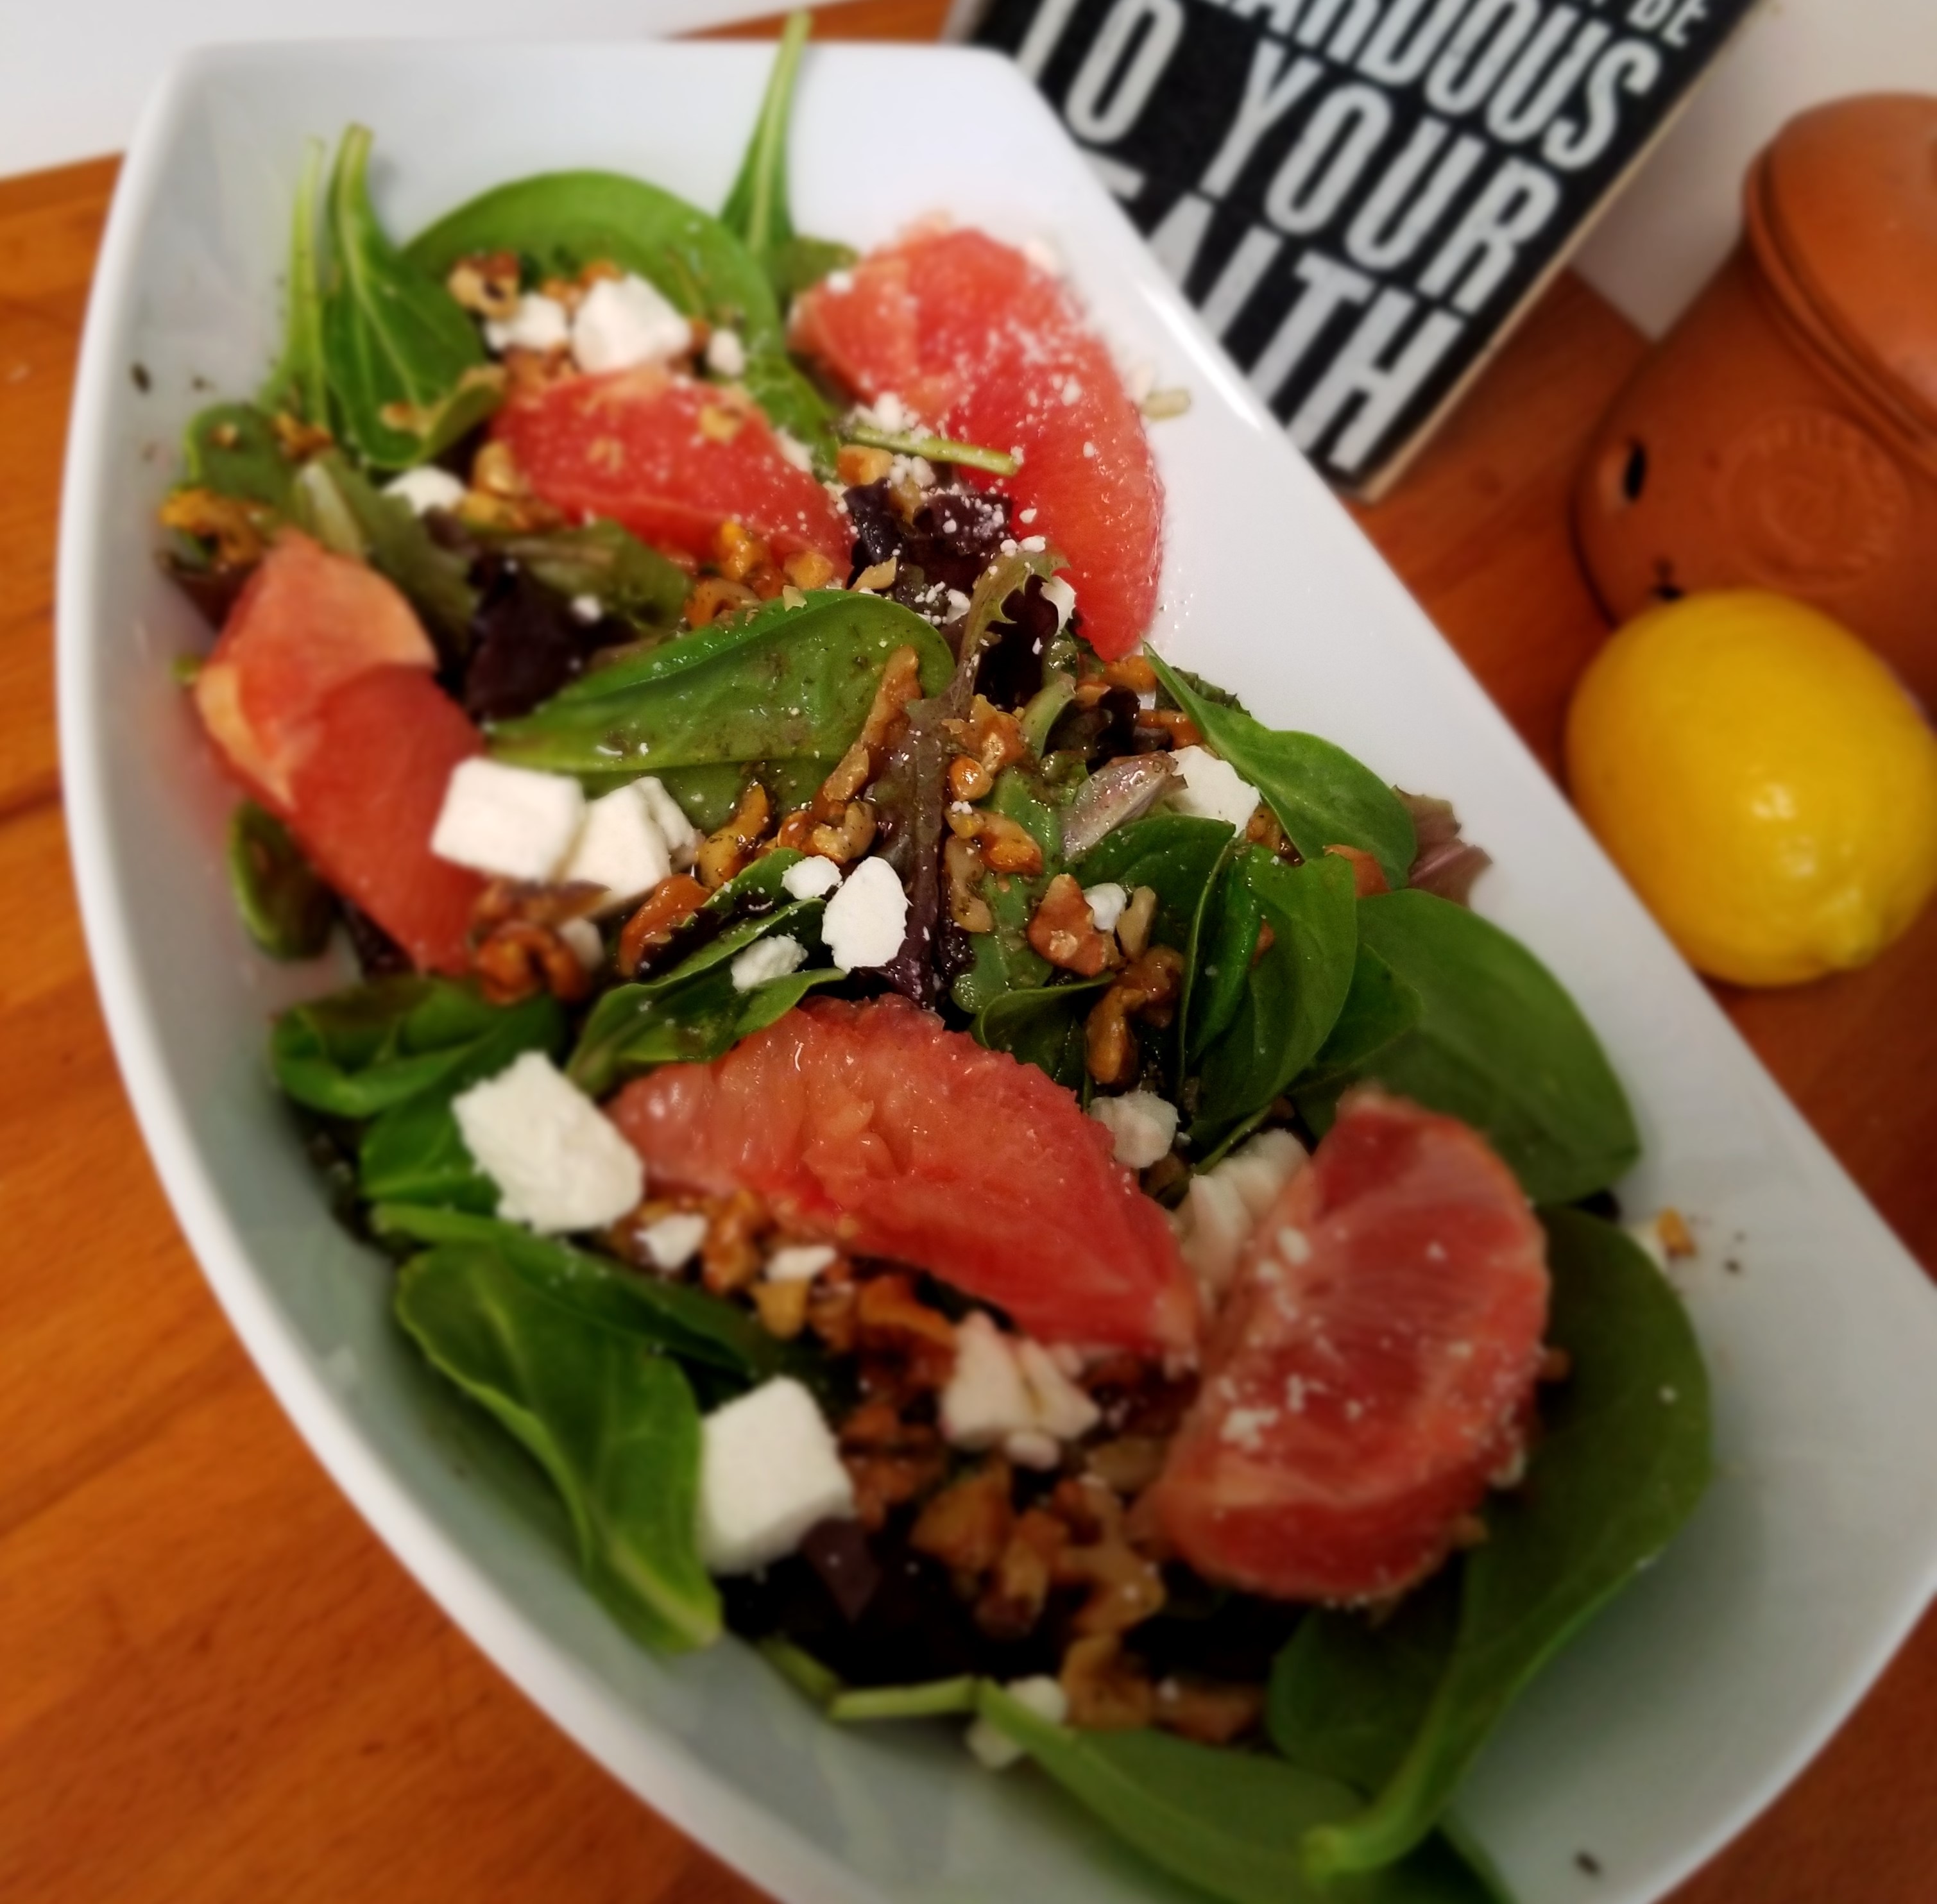 Citrus Spinach Salad with Feta and Cranberry Dressing